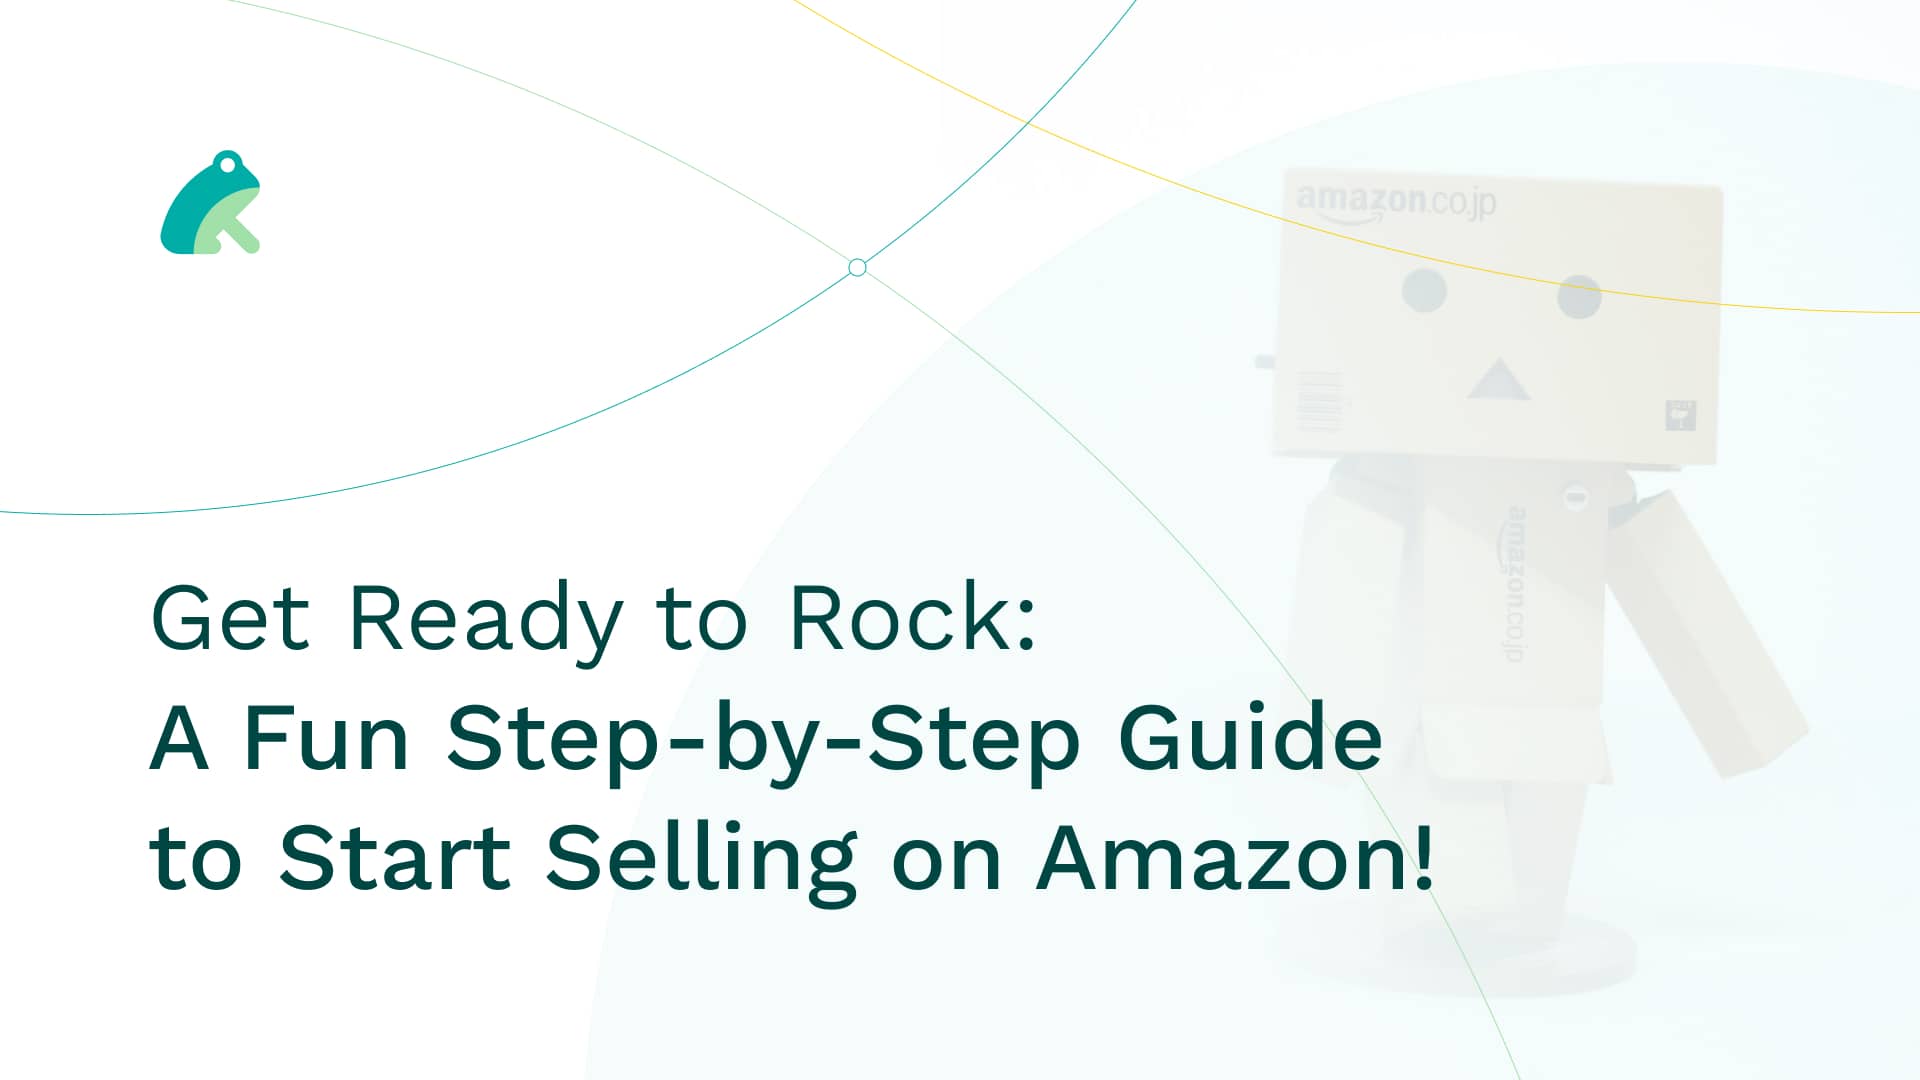 Get Ready to Rock: A Fun Step-by-Step Guide to Start Selling on Amazon!